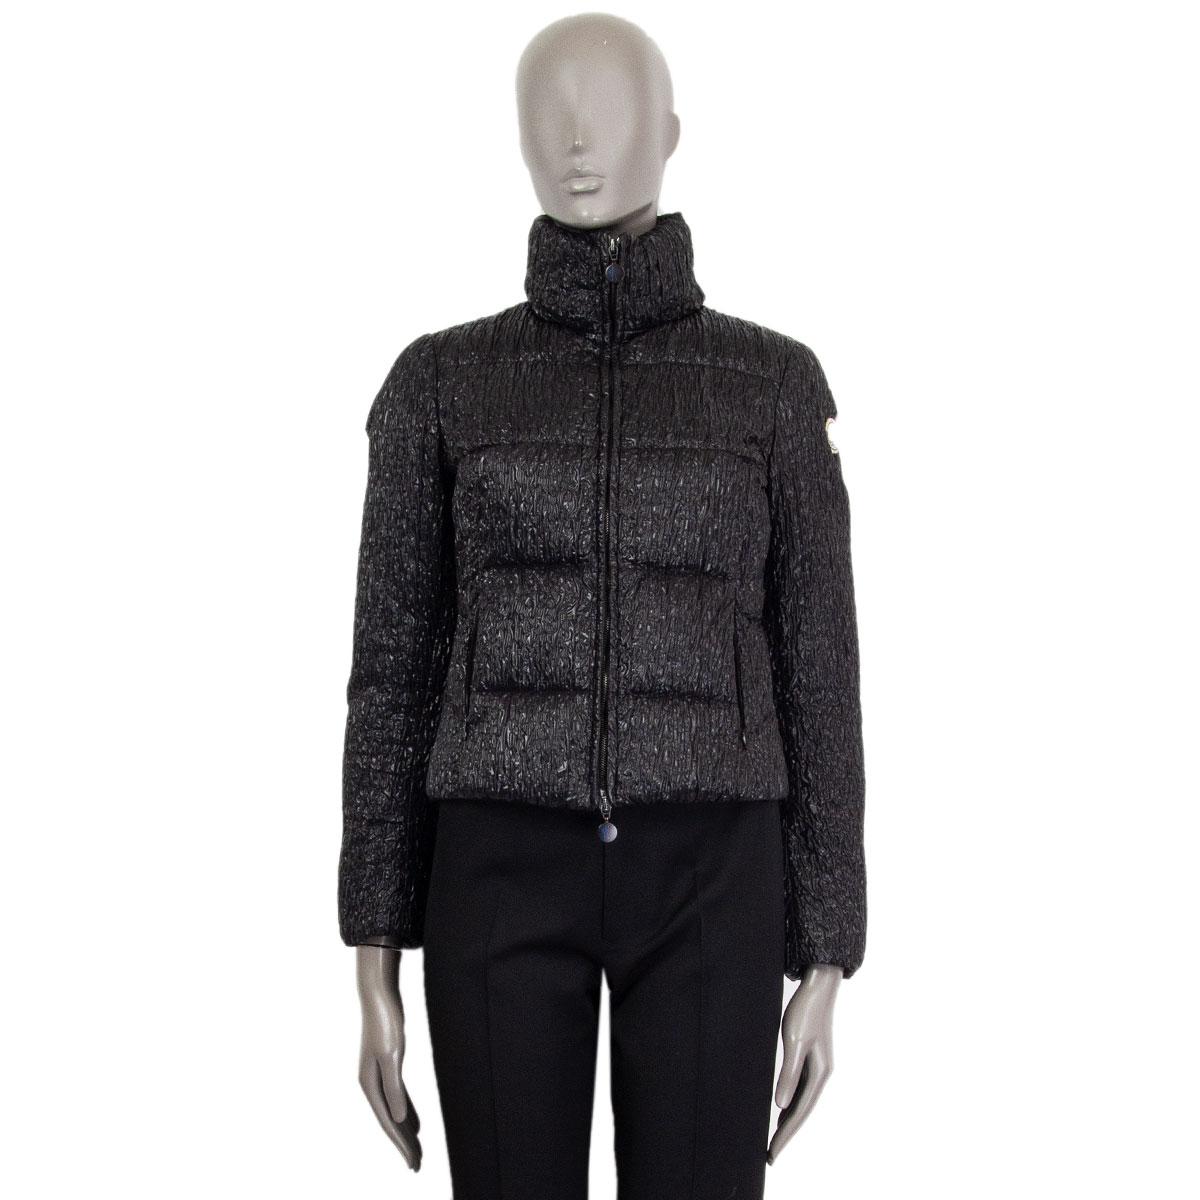 100% authentic Moncler quilted down-jacket in black polyamide (100%) and filling in duvet down (100%) with high collar and brand-logo on the left upper-arm. Closes with a black logo embossed zipper on the front and with zipped slit pockets. Lined in